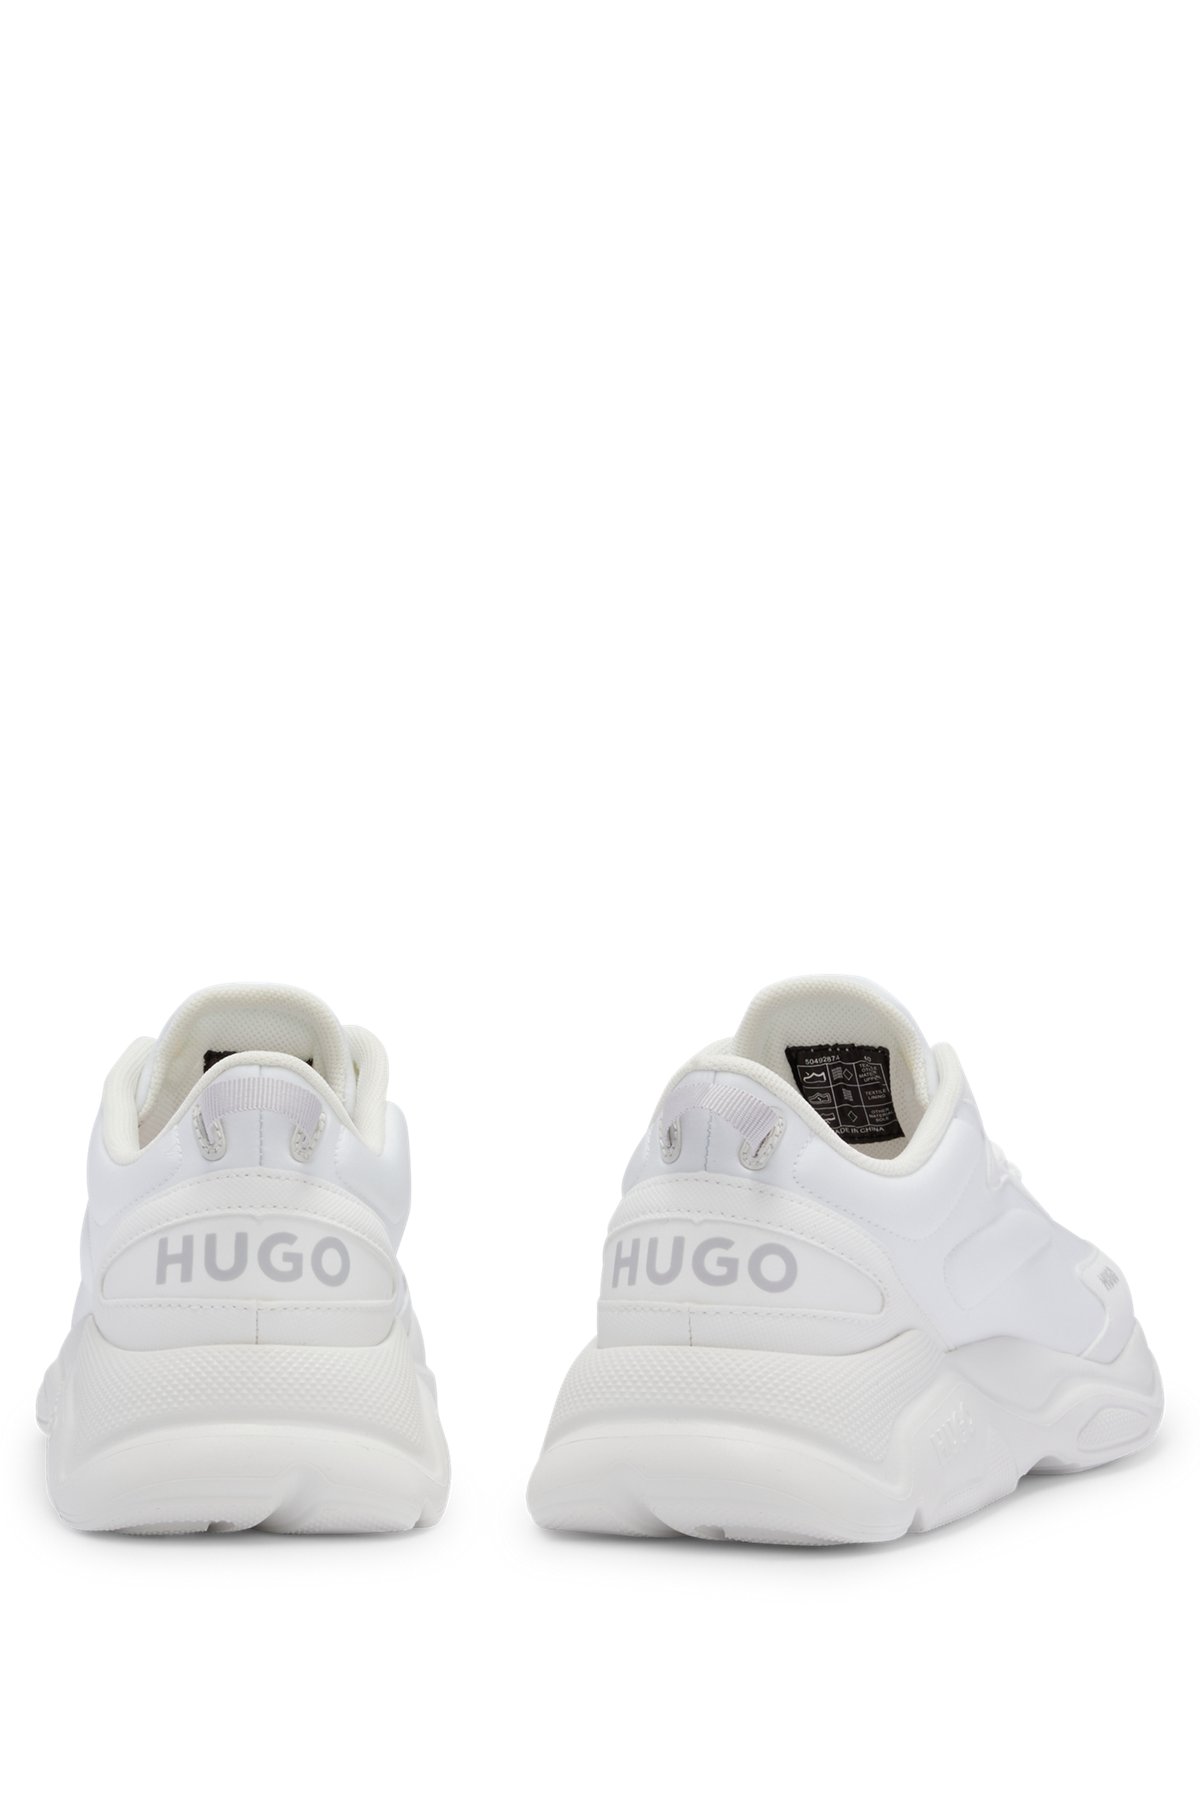 Running-style hybrid trainers with logo details, White